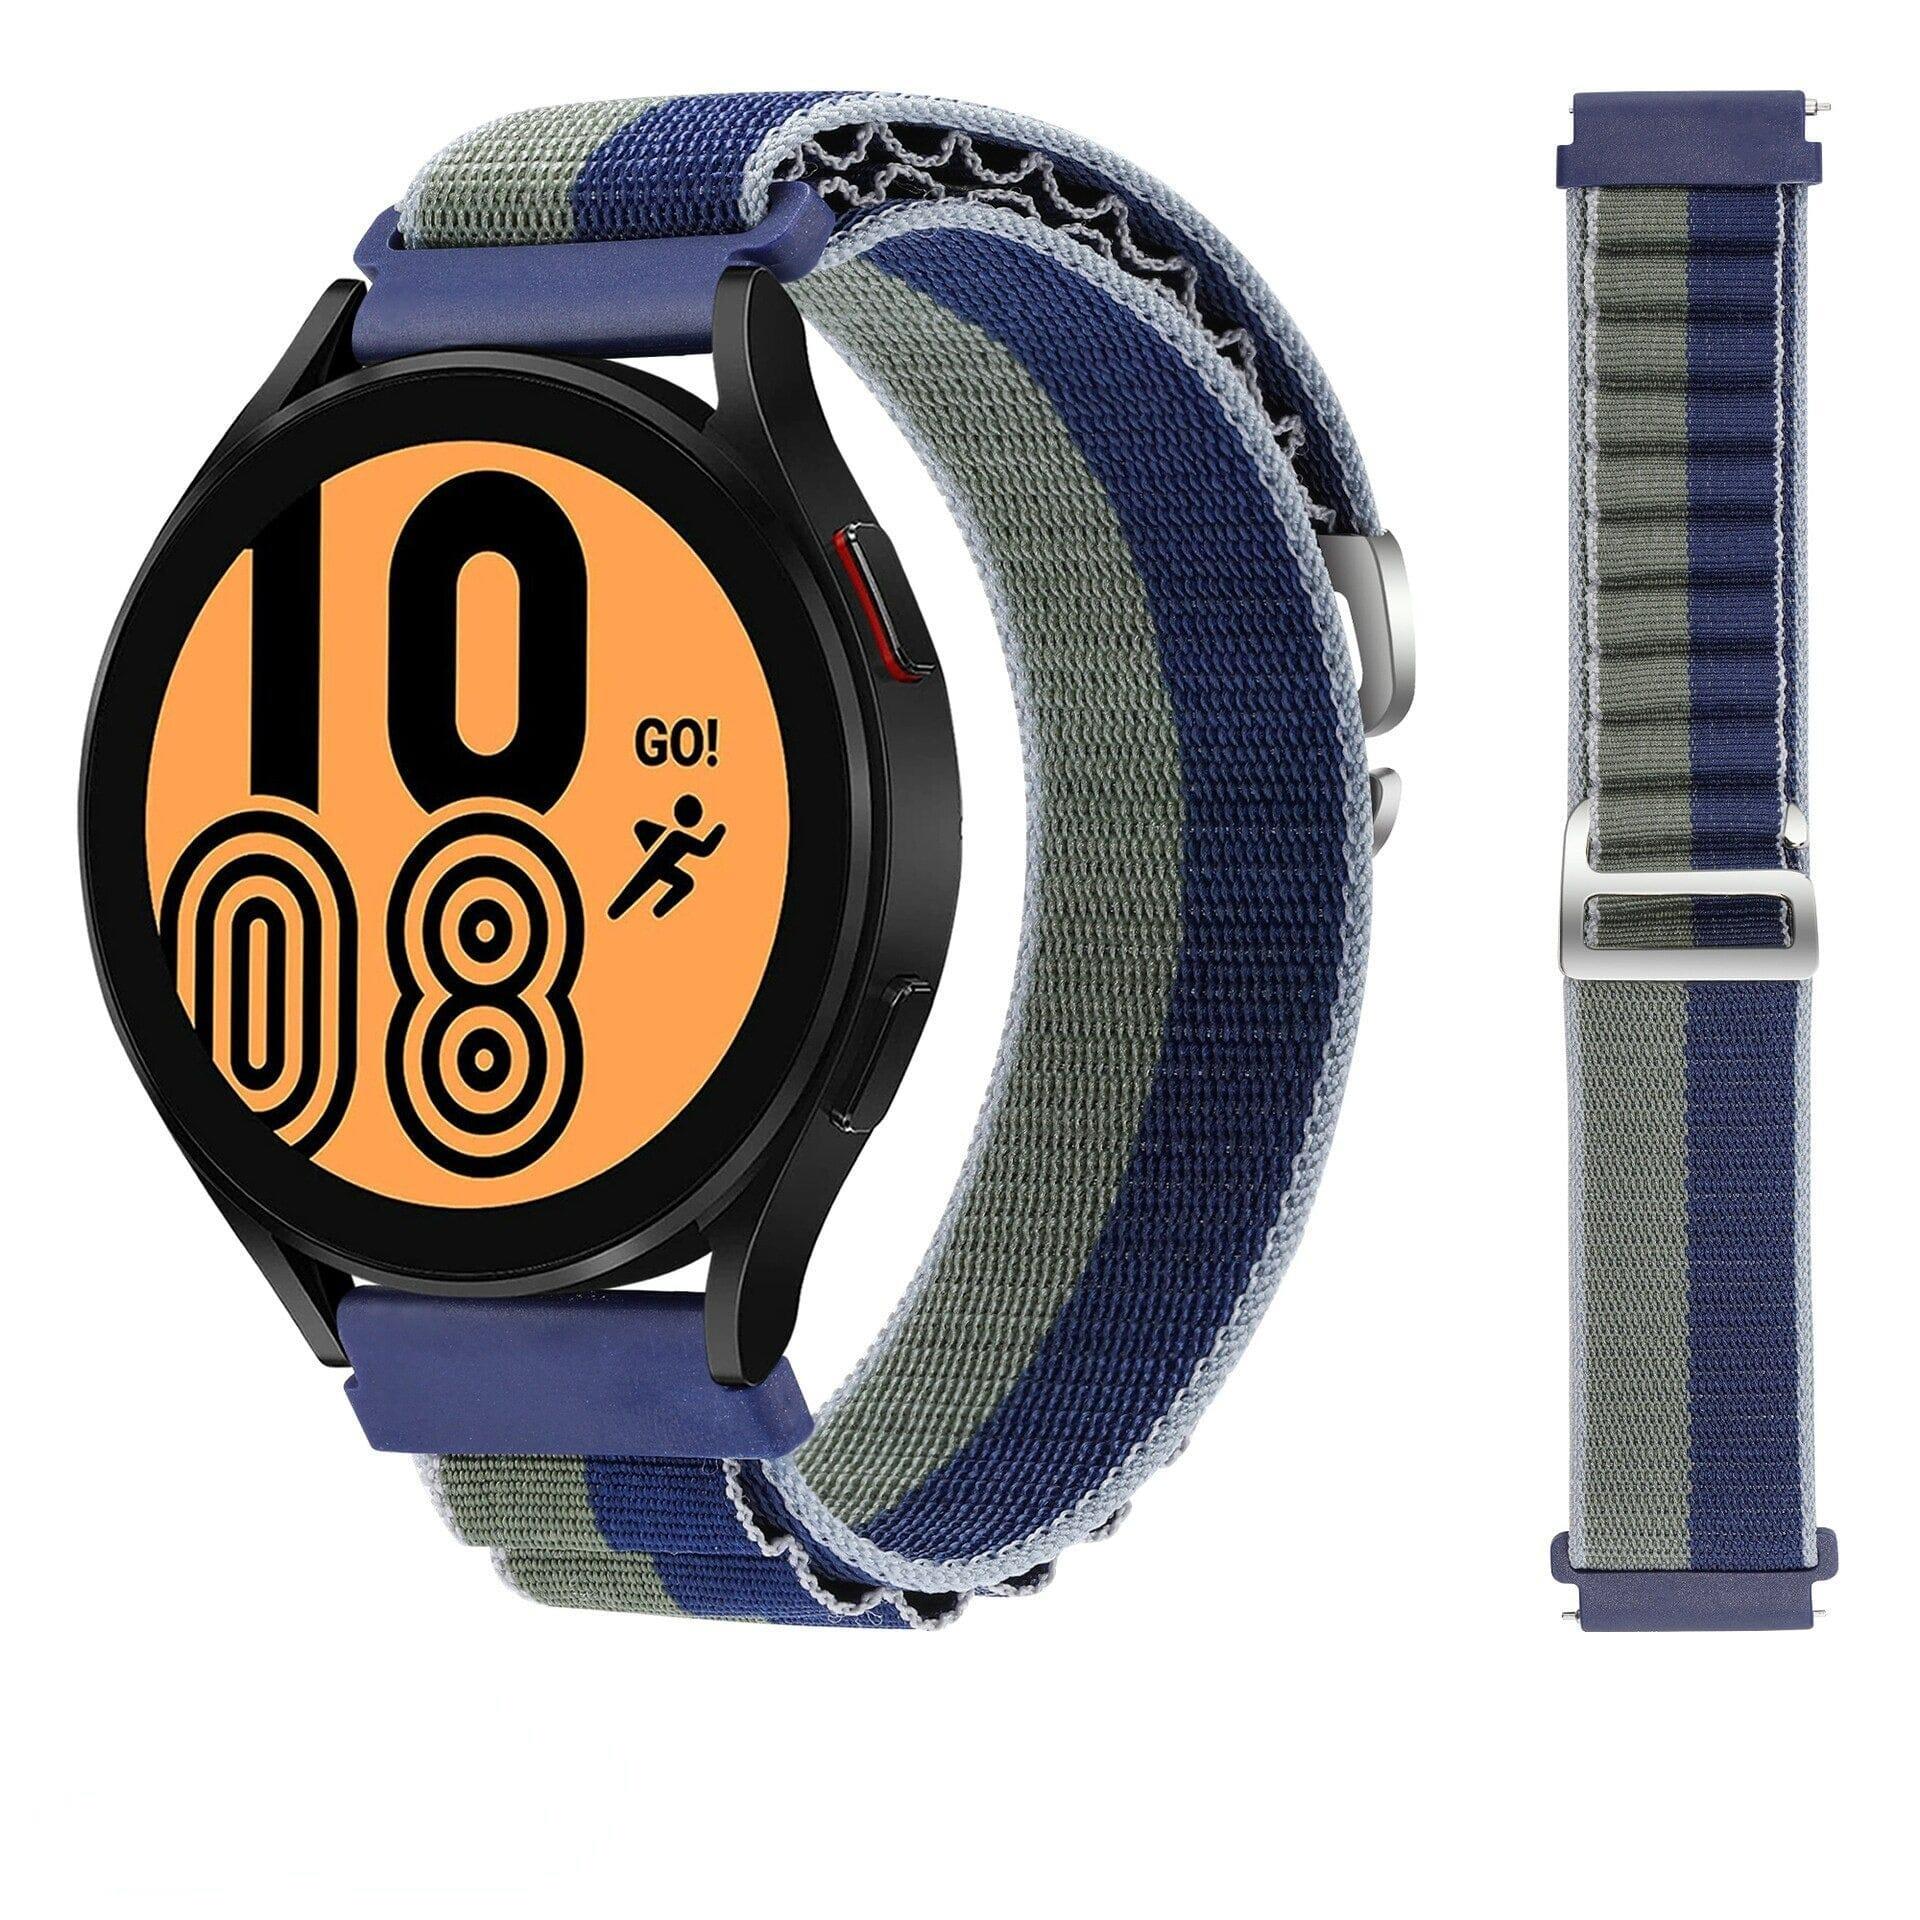 Alpine Loop Watch Straps Compatible with the Ticwatch E & C2